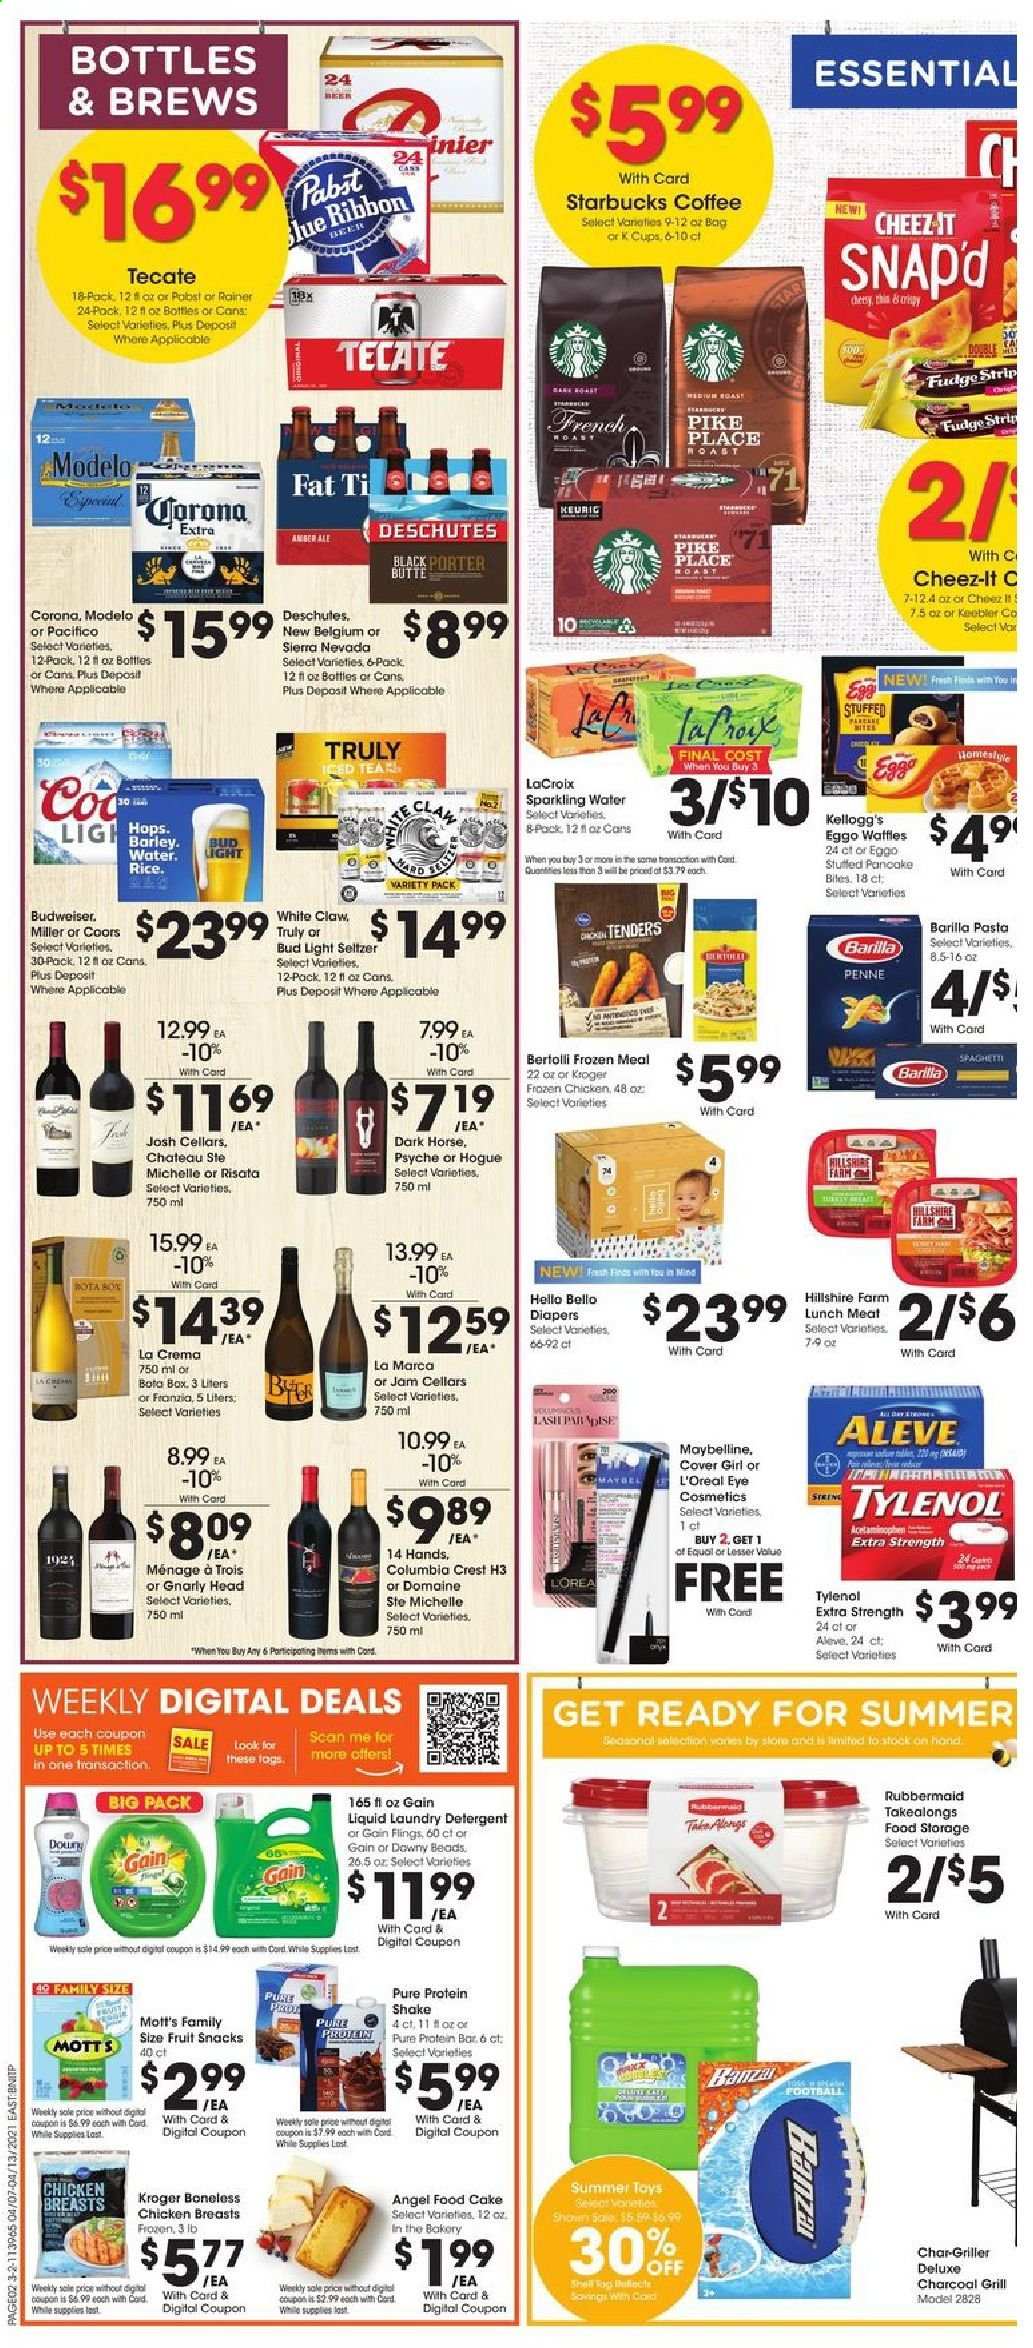 thumbnail - Fred Meyer Flyer - 04/07/2021 - 04/13/2021 - Sales products - Budweiser, Coors, cake, Angel Food, waffles, Barilla, Giovanni Rana, Hillshire Farm, lunch meat, protein drink, shake, eggs, fudge, Kellogg's, Keebler, Cheez-It, spaghetti, pasta, penne, Rana, fruit jam, Mott's, seltzer water, sparkling water, coffee, Starbucks, L'Or, White Claw, TRULY, beer, Bud Light, Corona Extra, Miller, Modelo, chicken breasts, detergent, Gain, laundry detergent, Crest, L’Oréal, Maybelline, ribbon, toys, Shell, Aleve, Tylenol. Page 2.